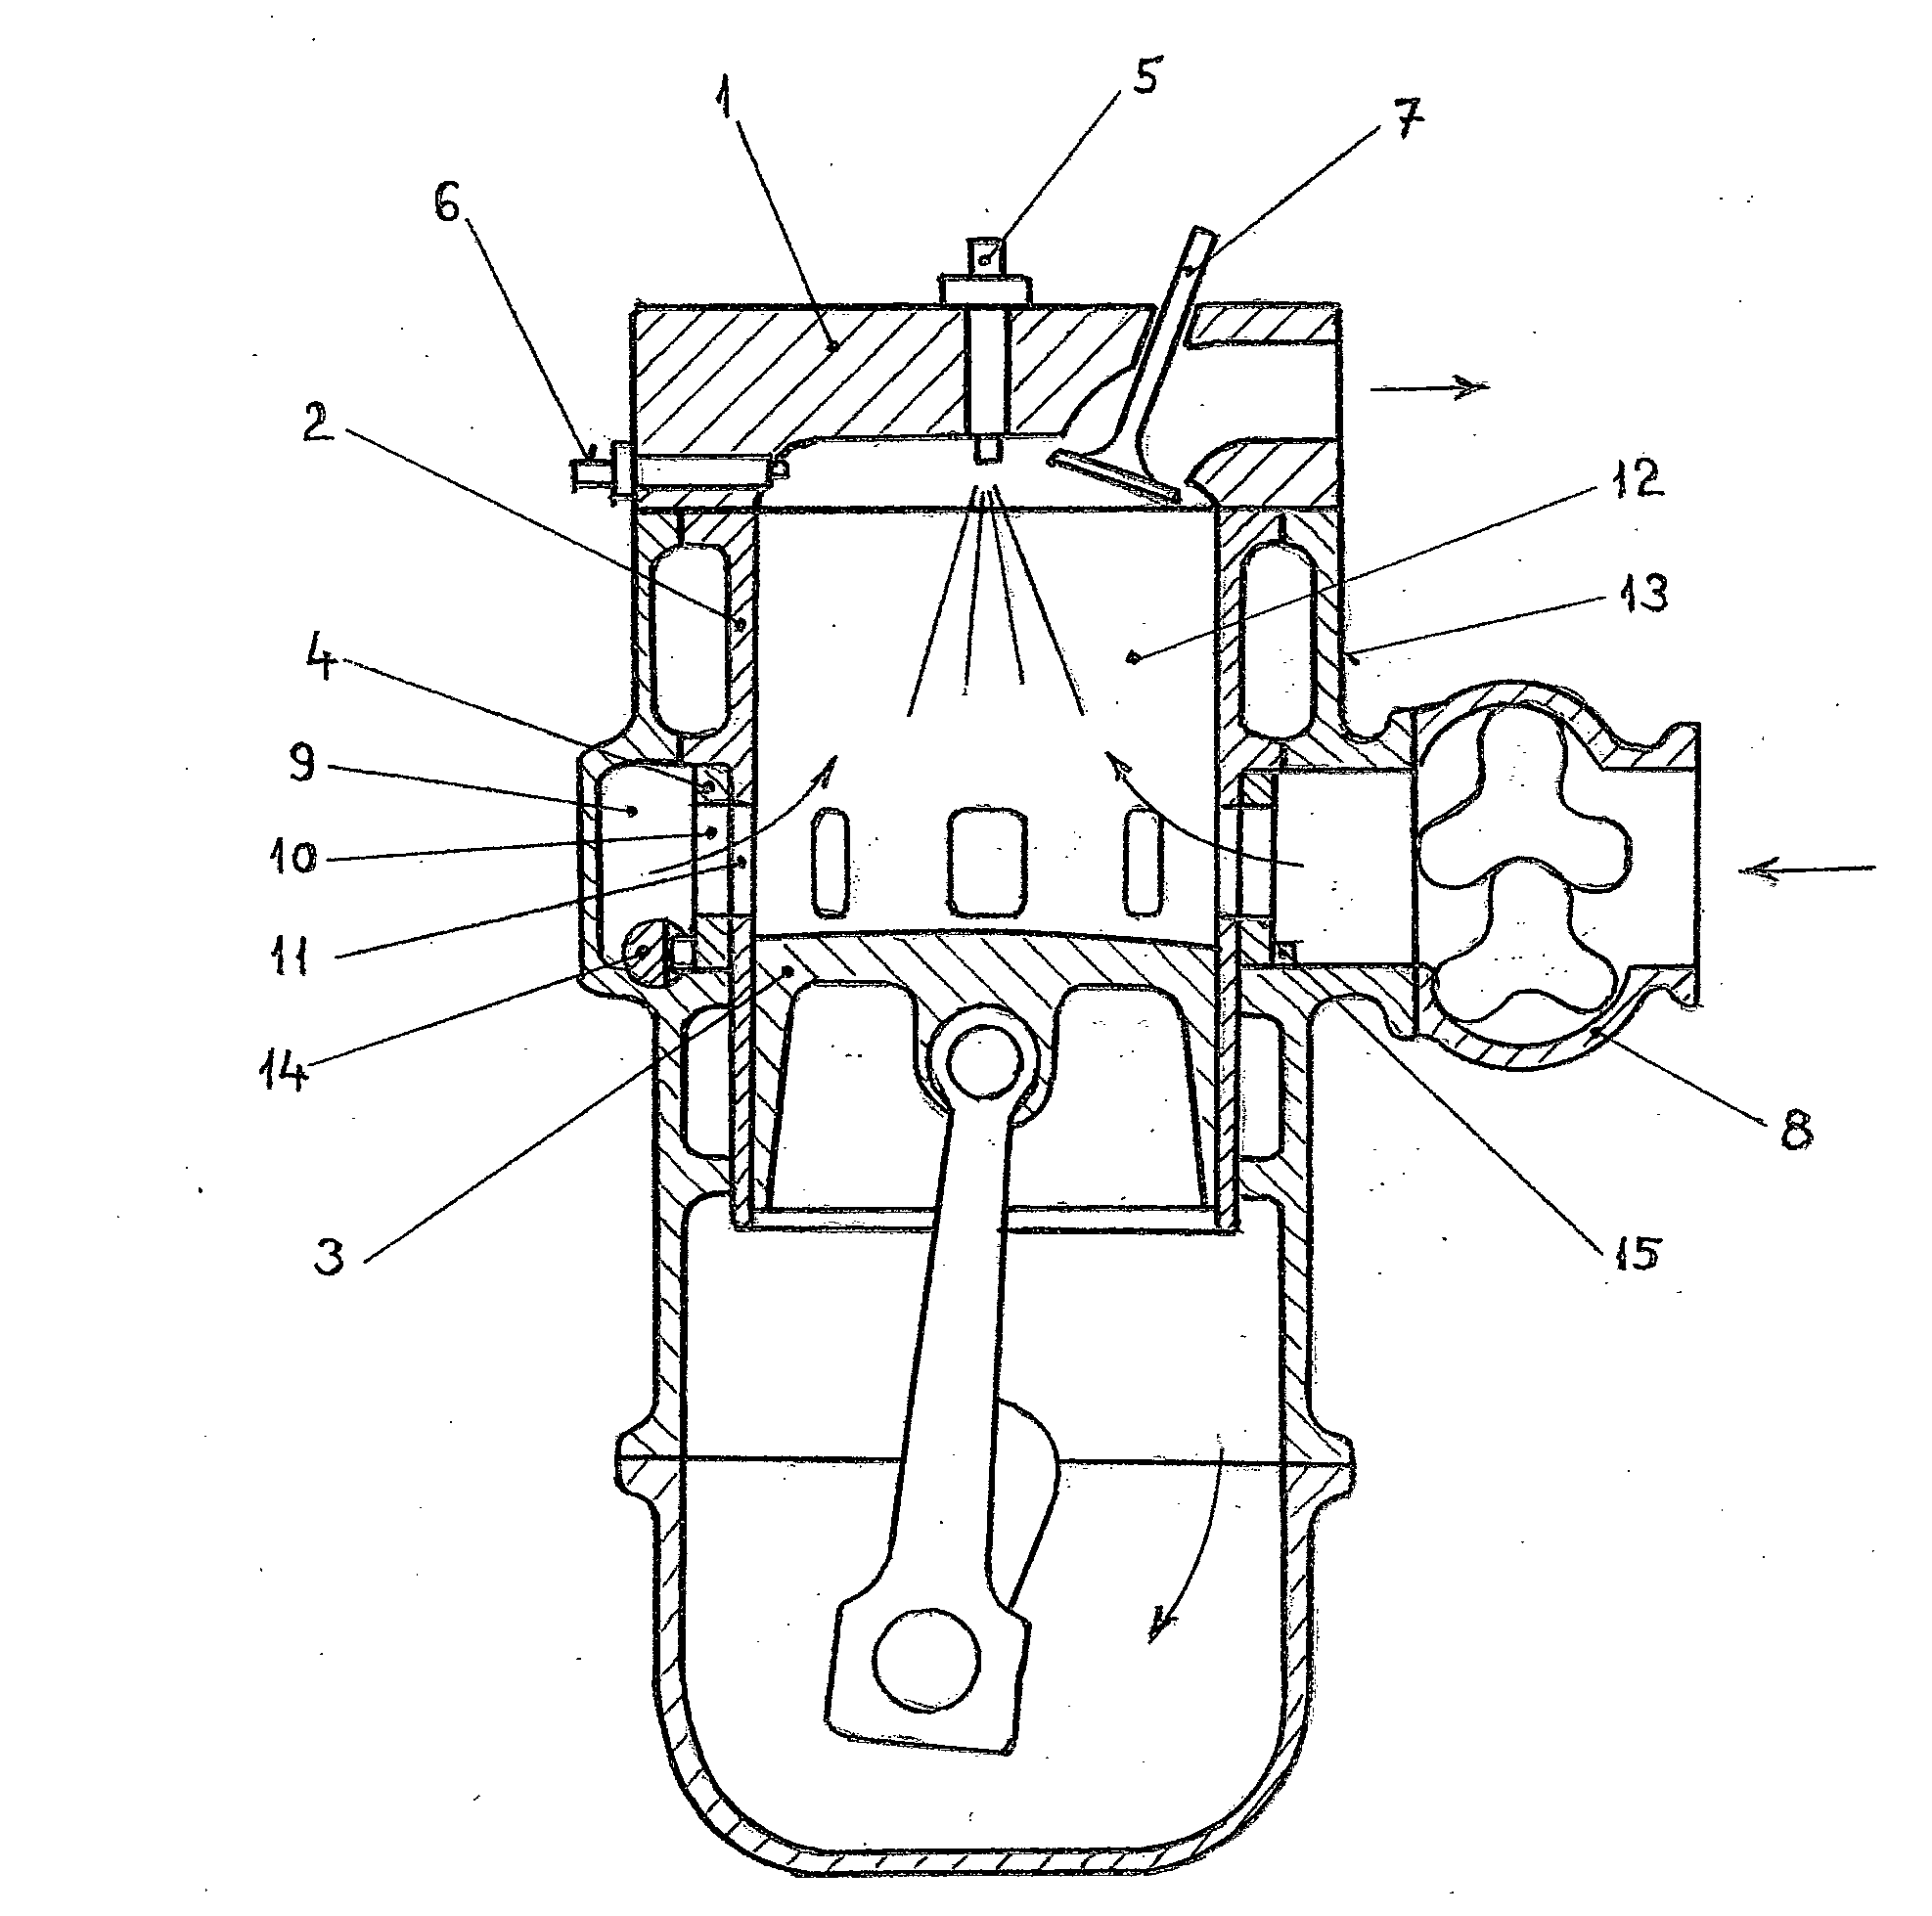 Two-stroke spark-ignition engine